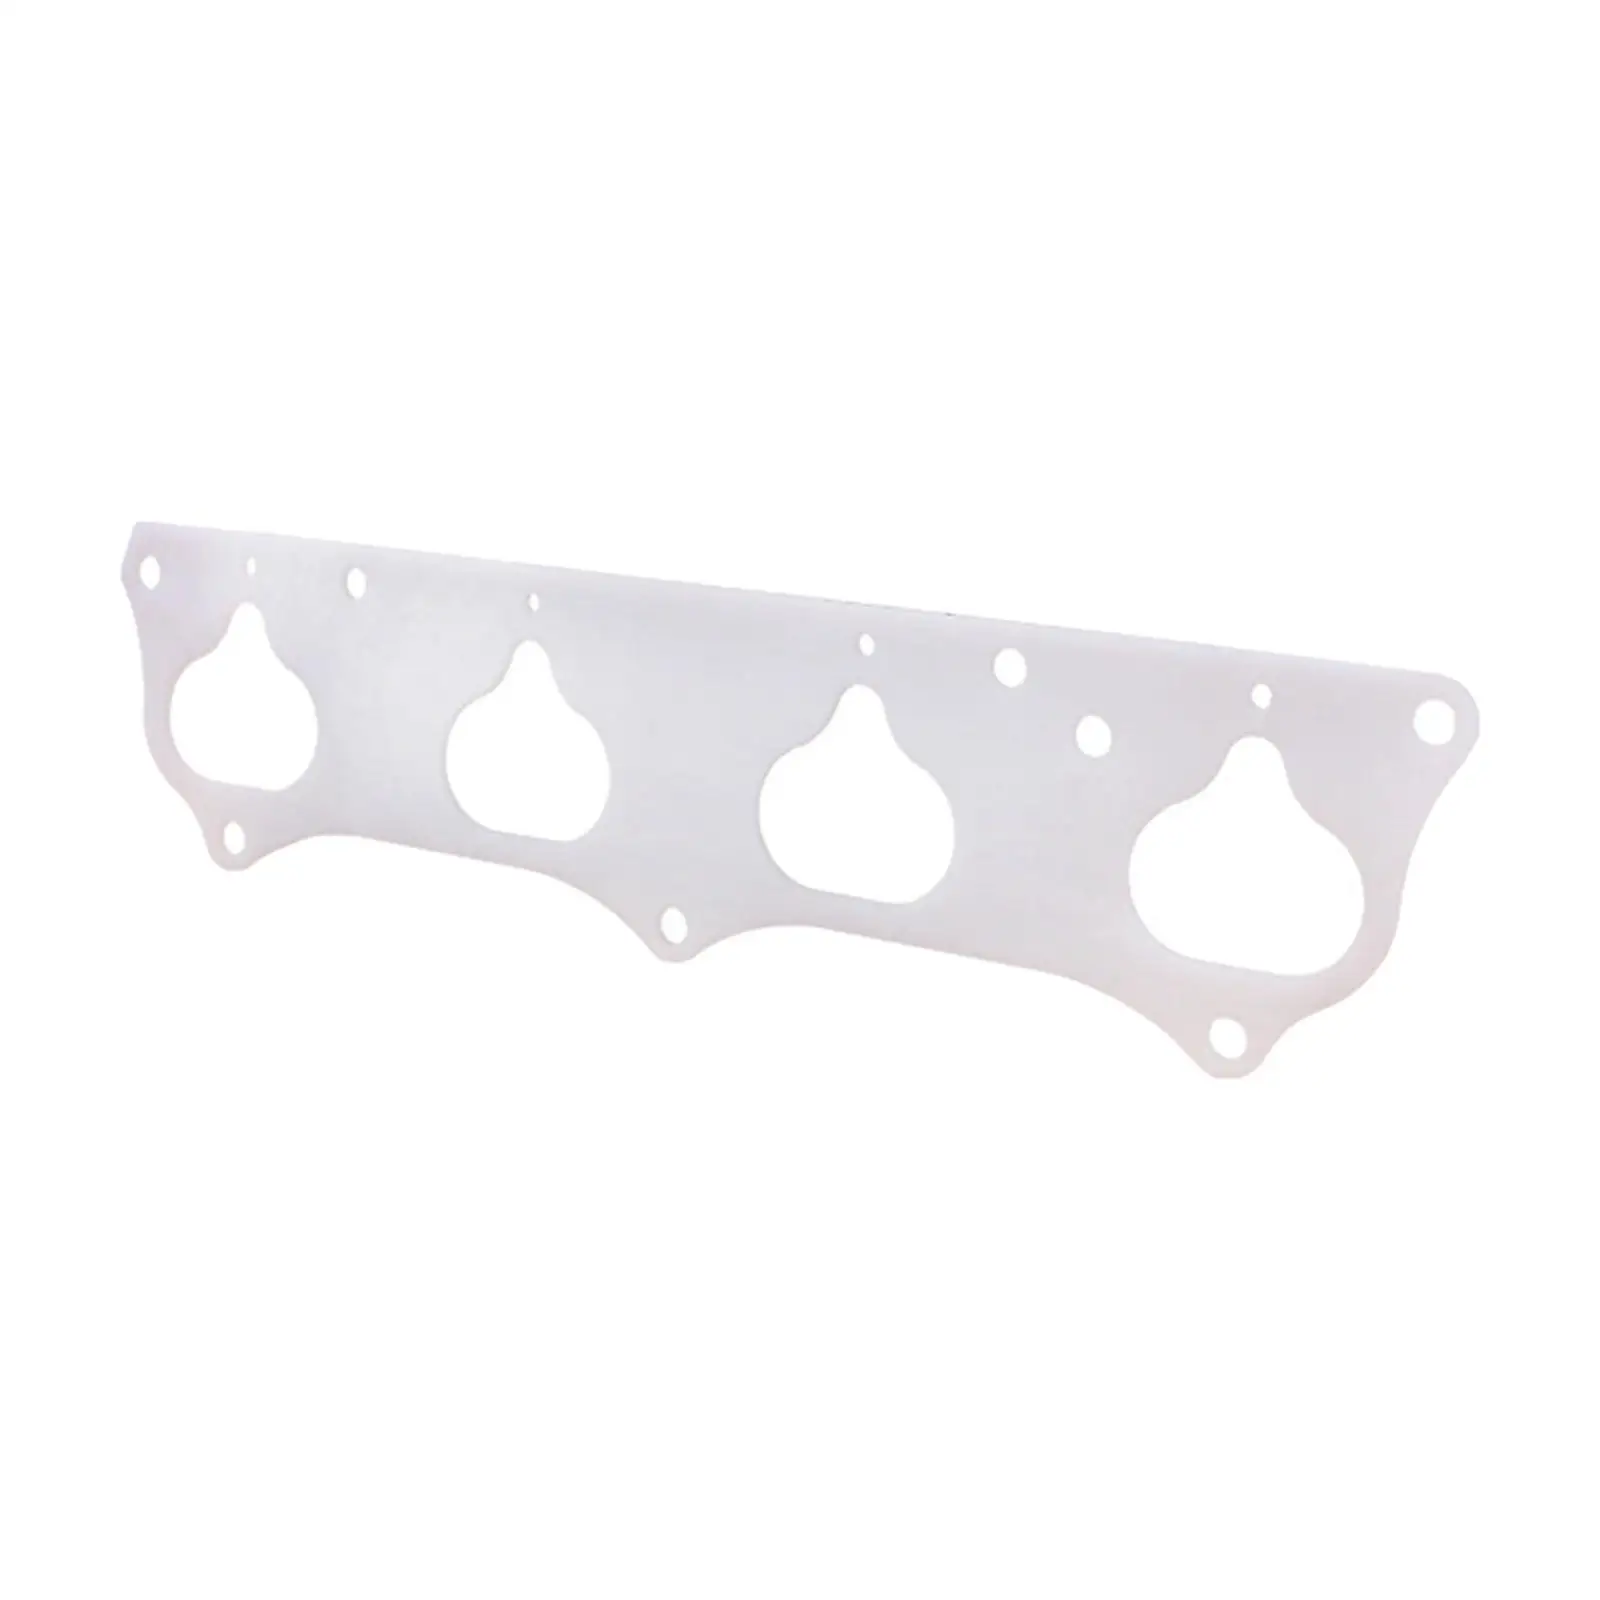 Thermal Intake Manifold Gasket Durable Premium High Performance Spare Parts Replaces for Swap K20A/A2/A3/Z1 K-series